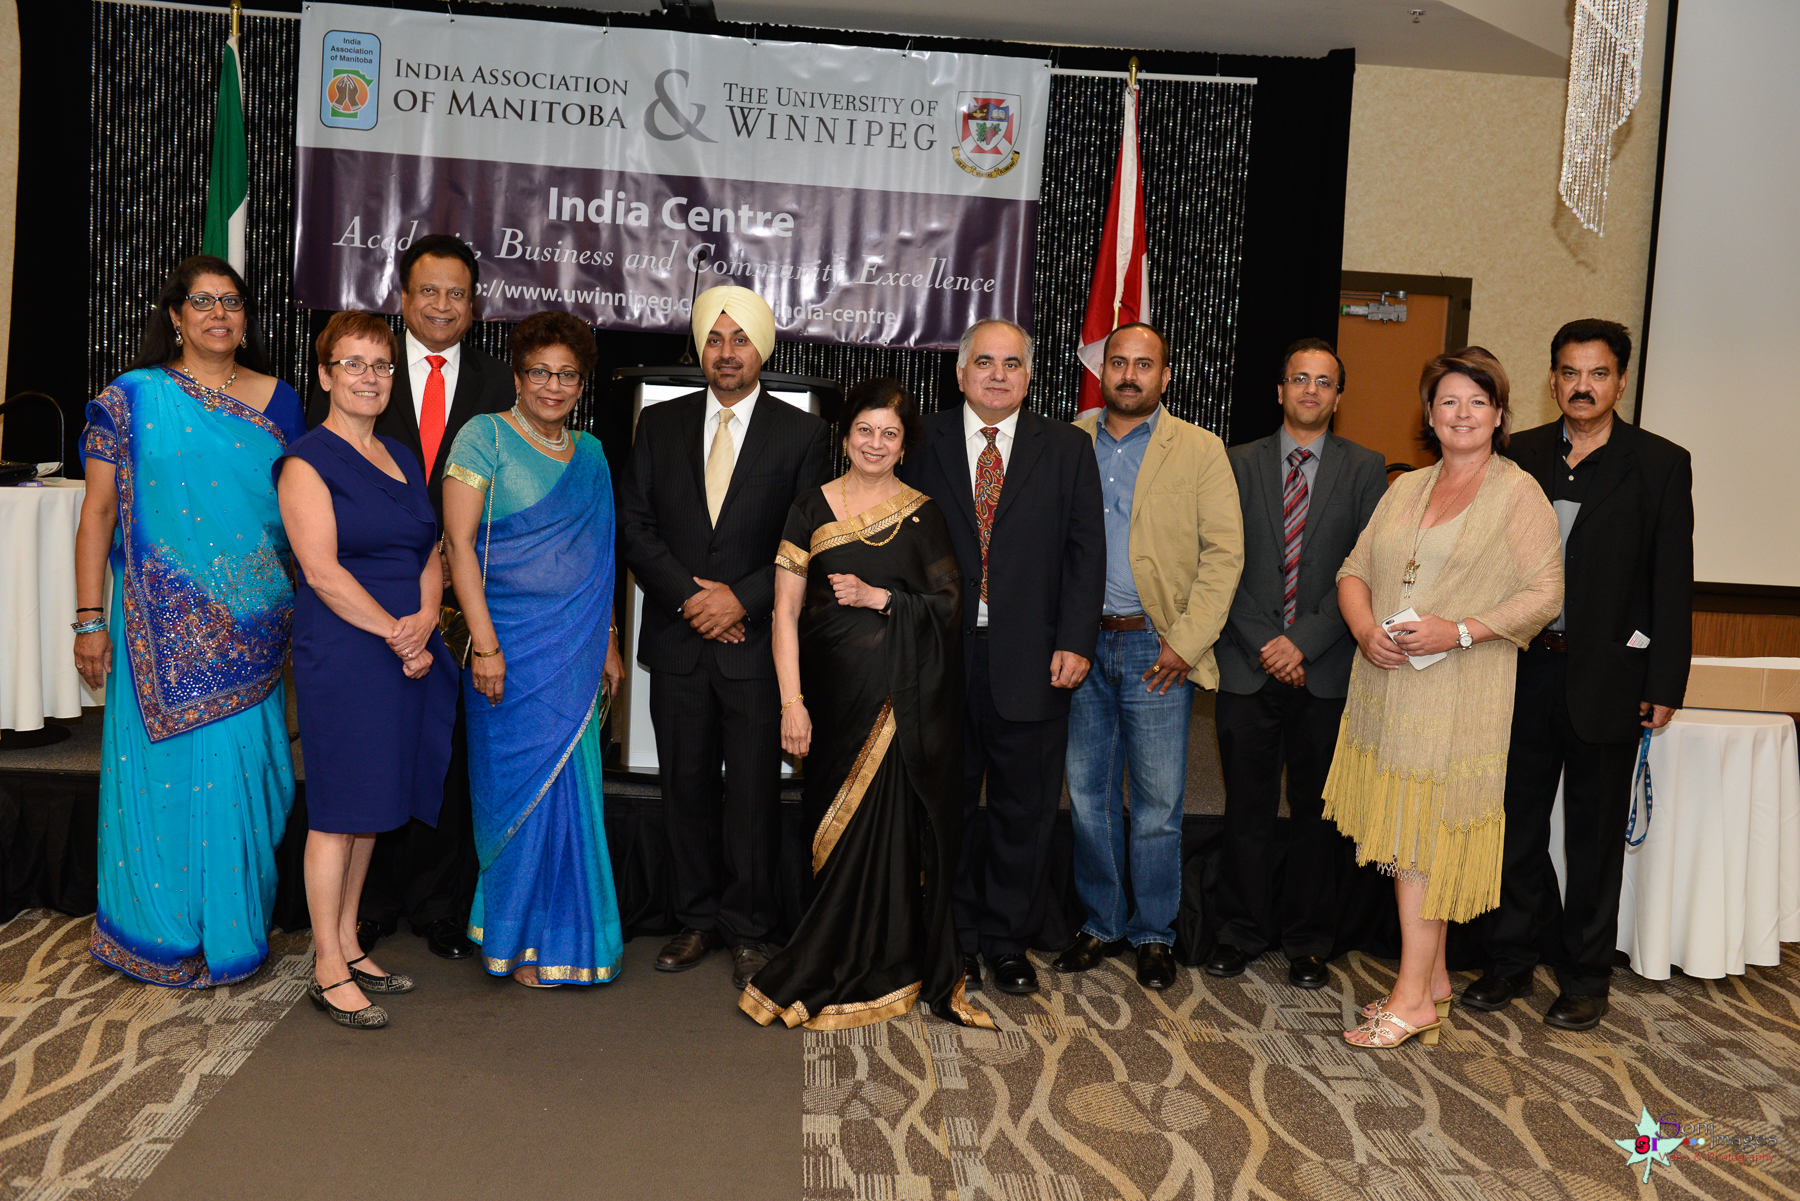 india-association-of-mb-dinner-512.png